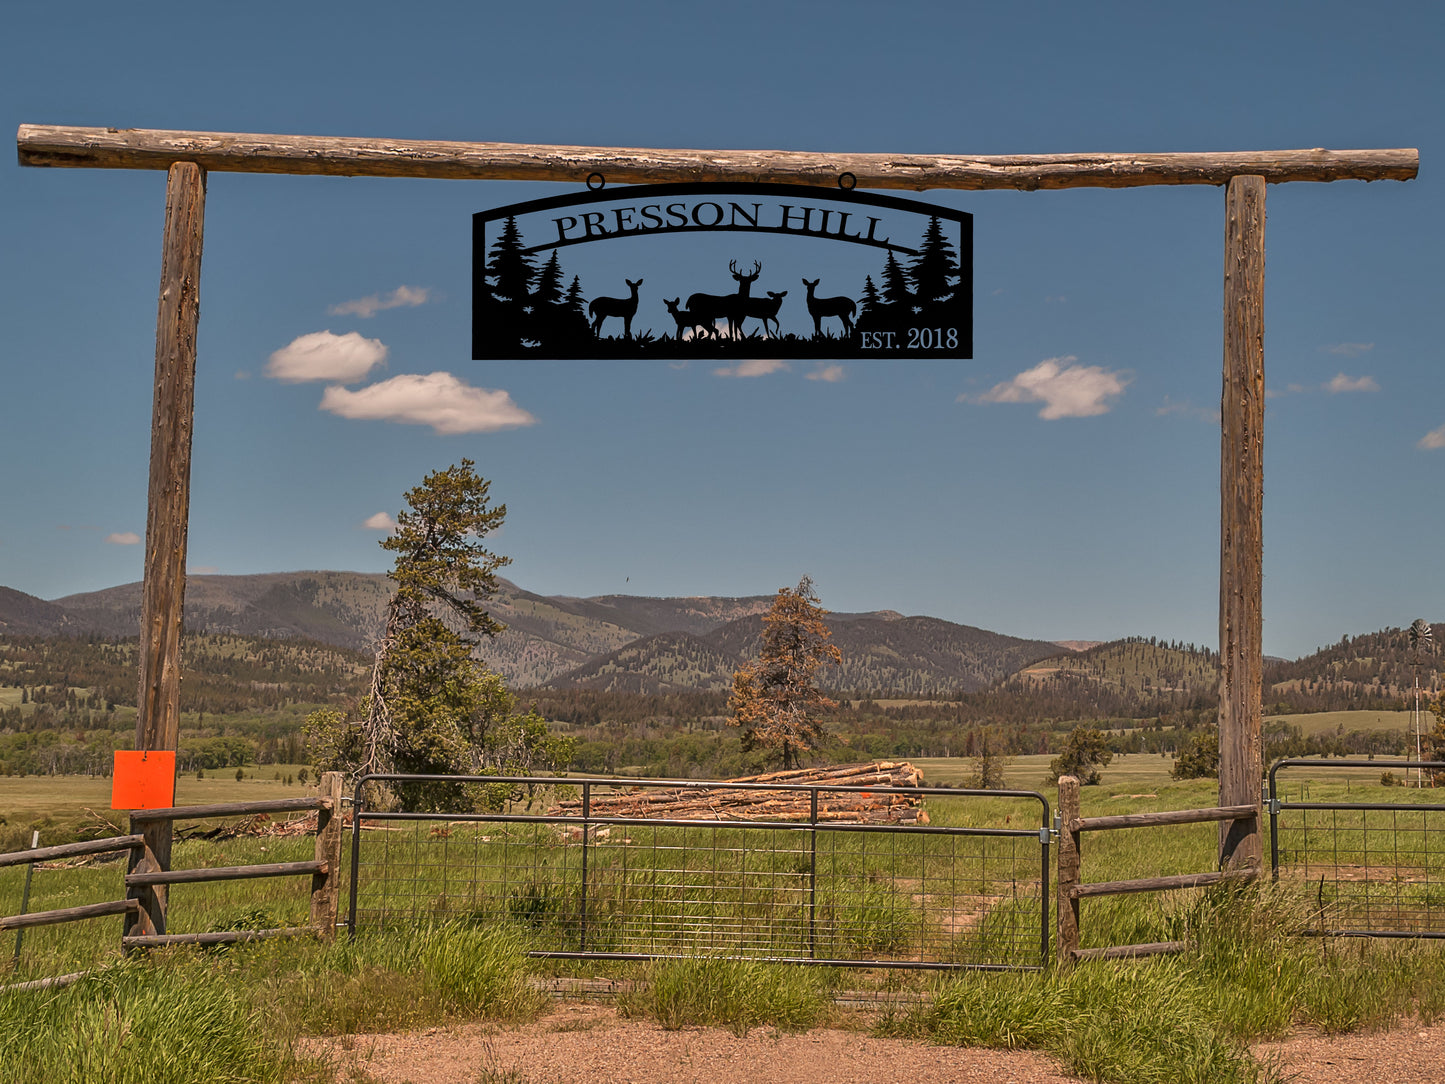 Deer Ranch Sign with Established Year